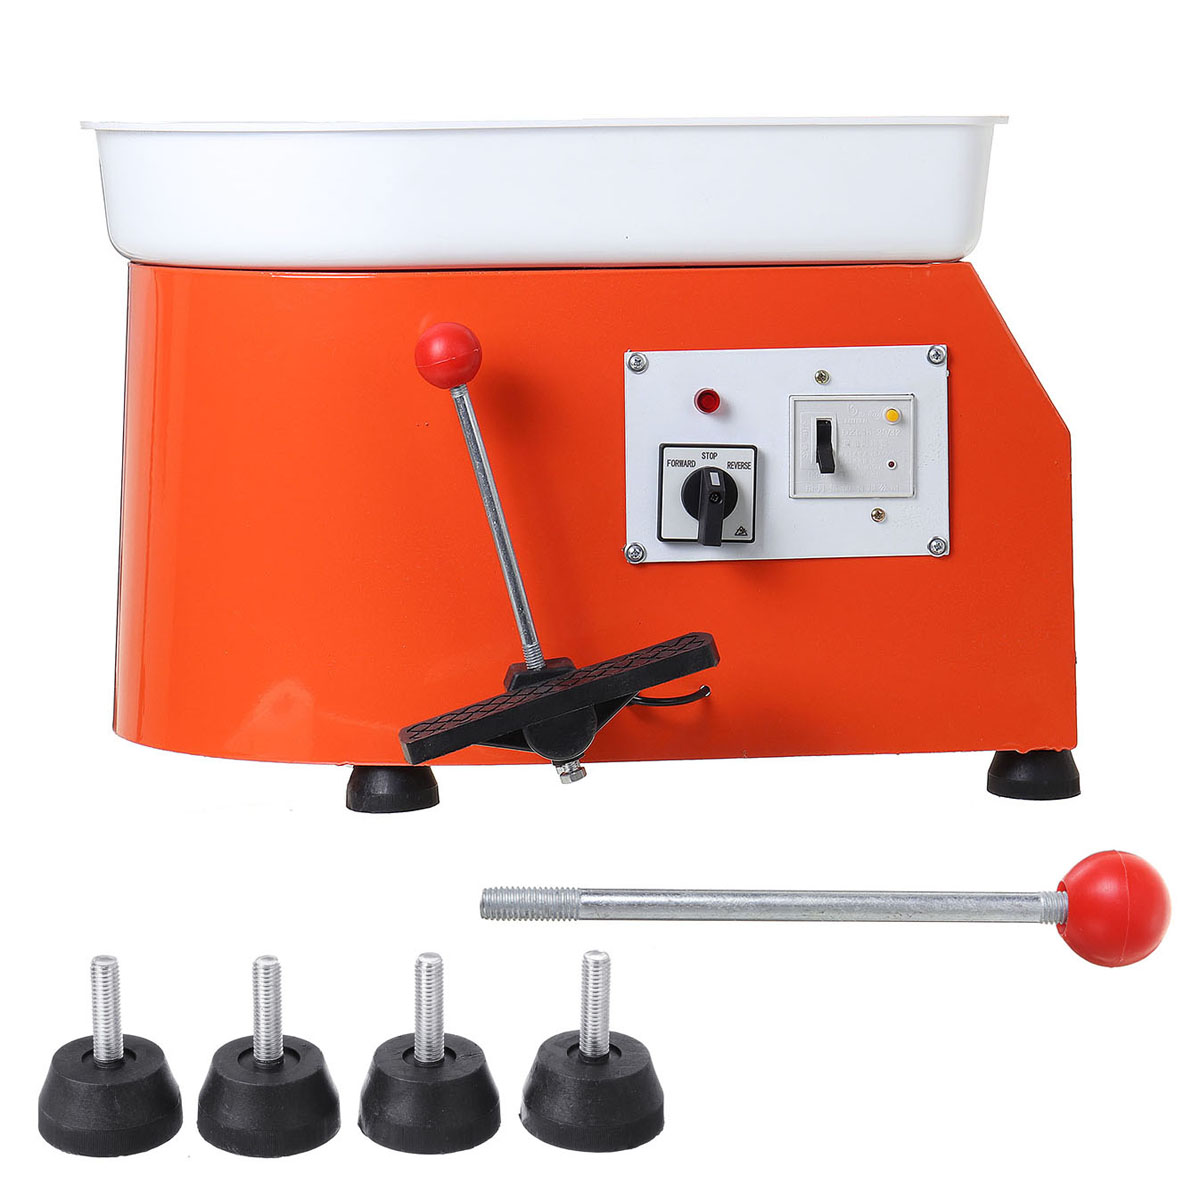 Find 600W 25CM Electric Pottery Wheel Machine Ceramic Work Clay Art Craft Teaching Machine for Sale on Gipsybee.com with cryptocurrencies